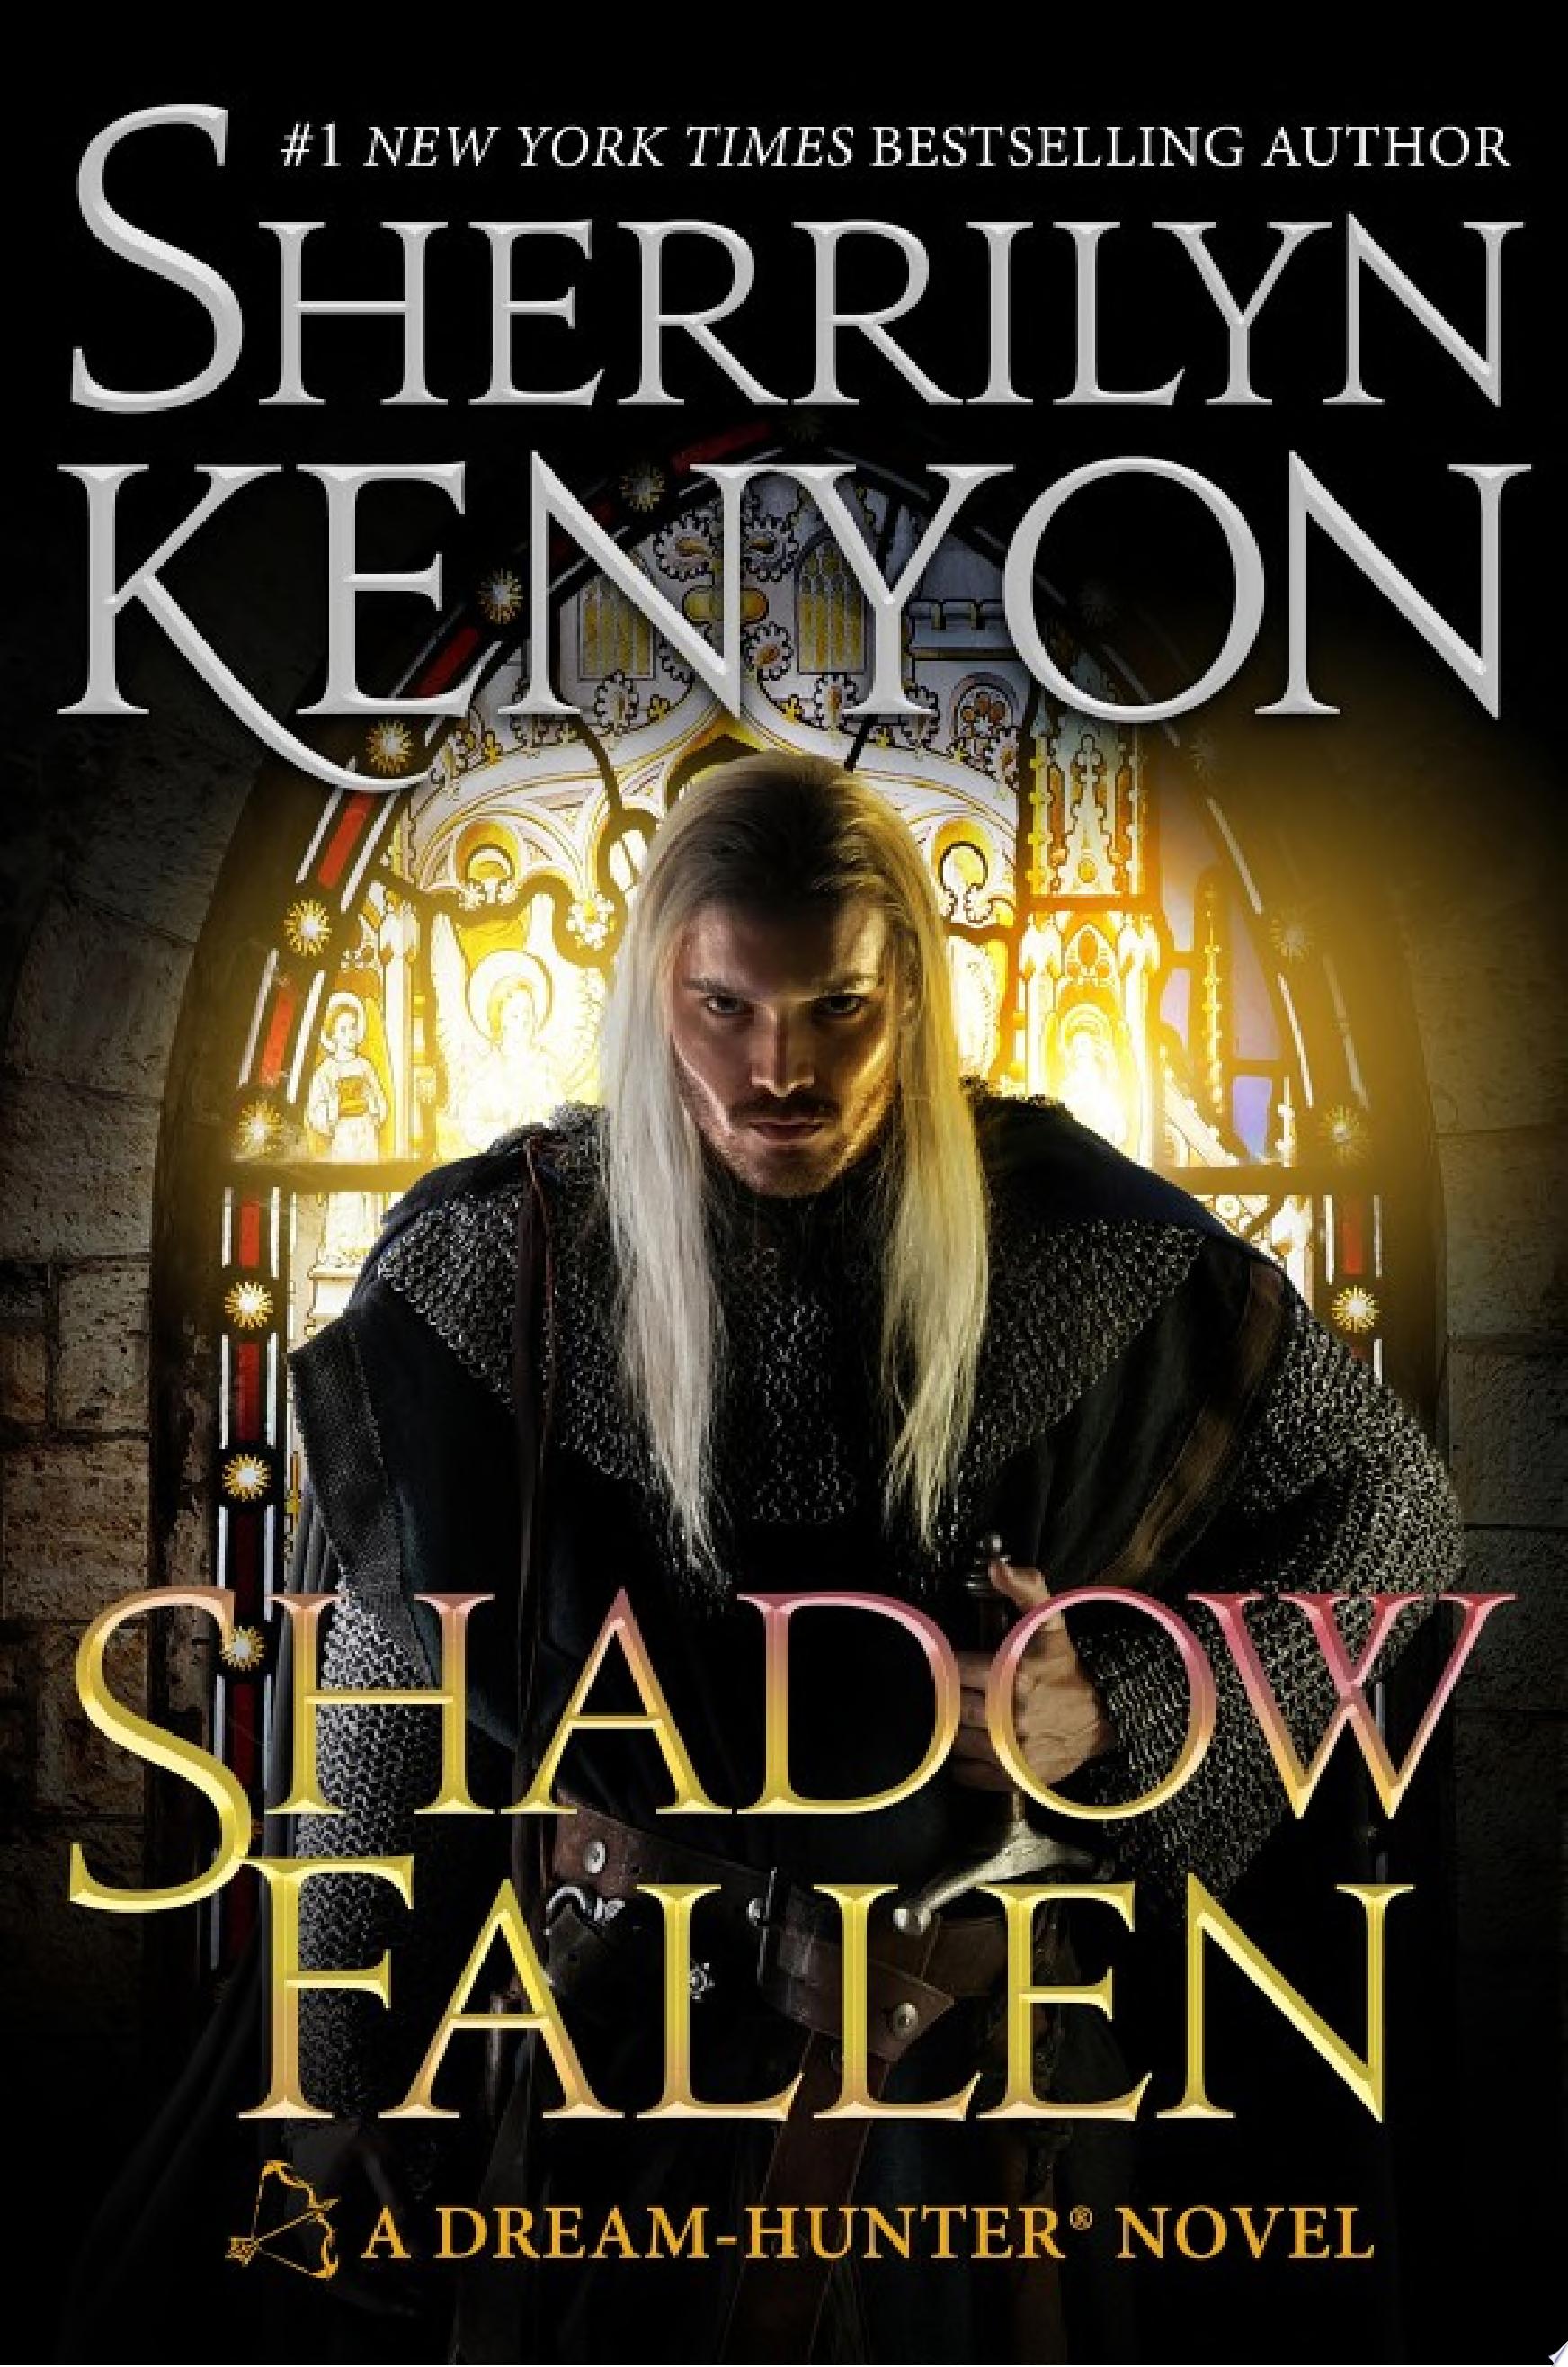 Image for "Shadow Fallen"